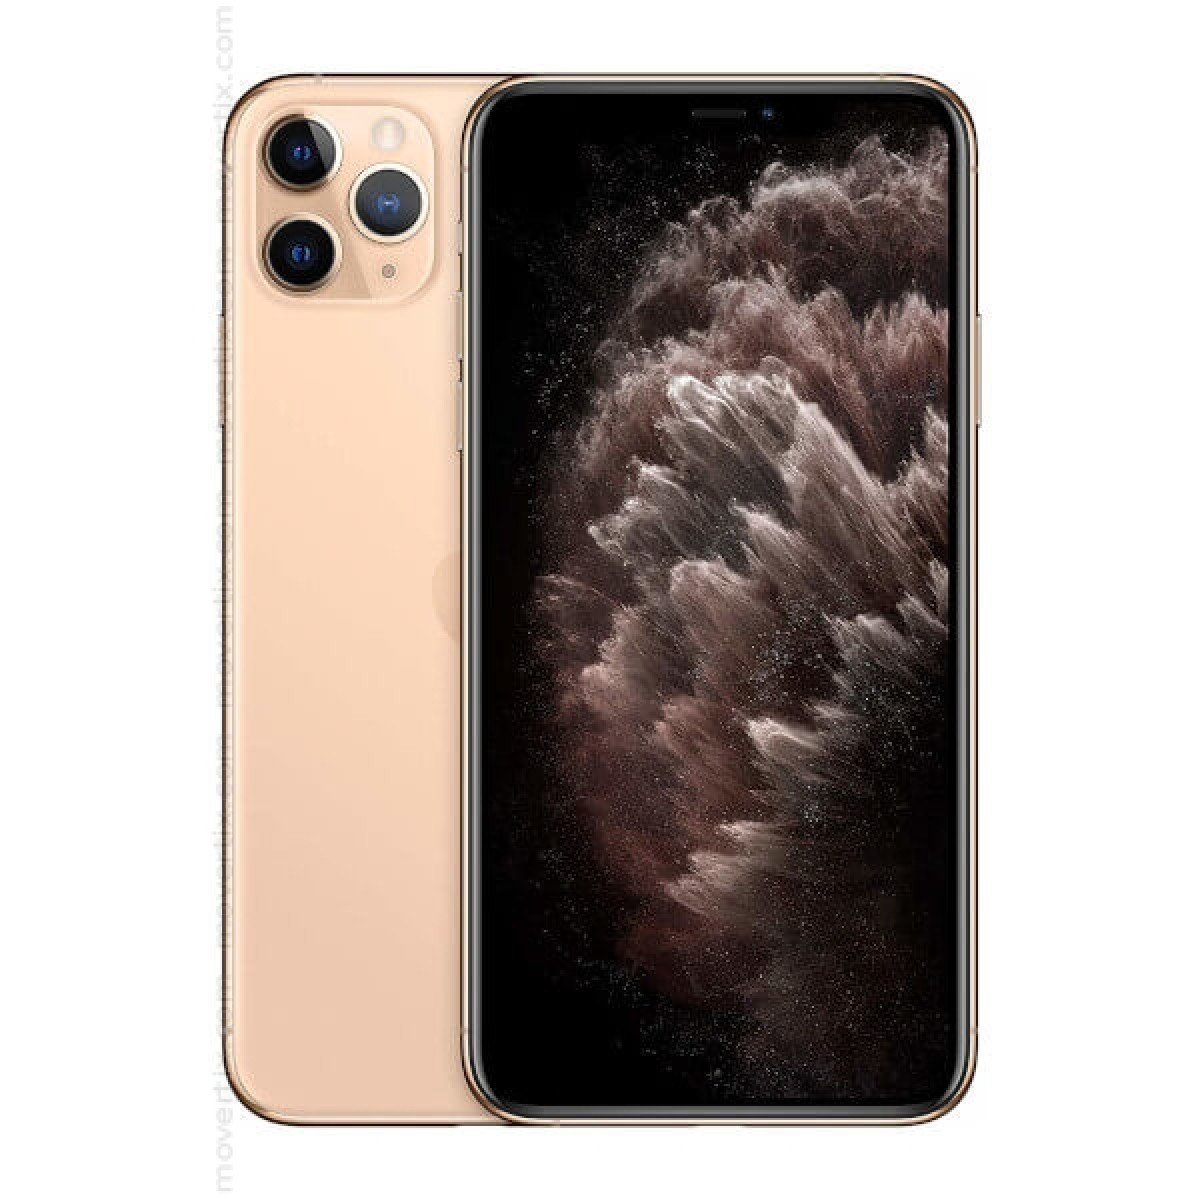 Iphone 11 Pro Max Gold 64gb 0190199381896 Movertix Mobile